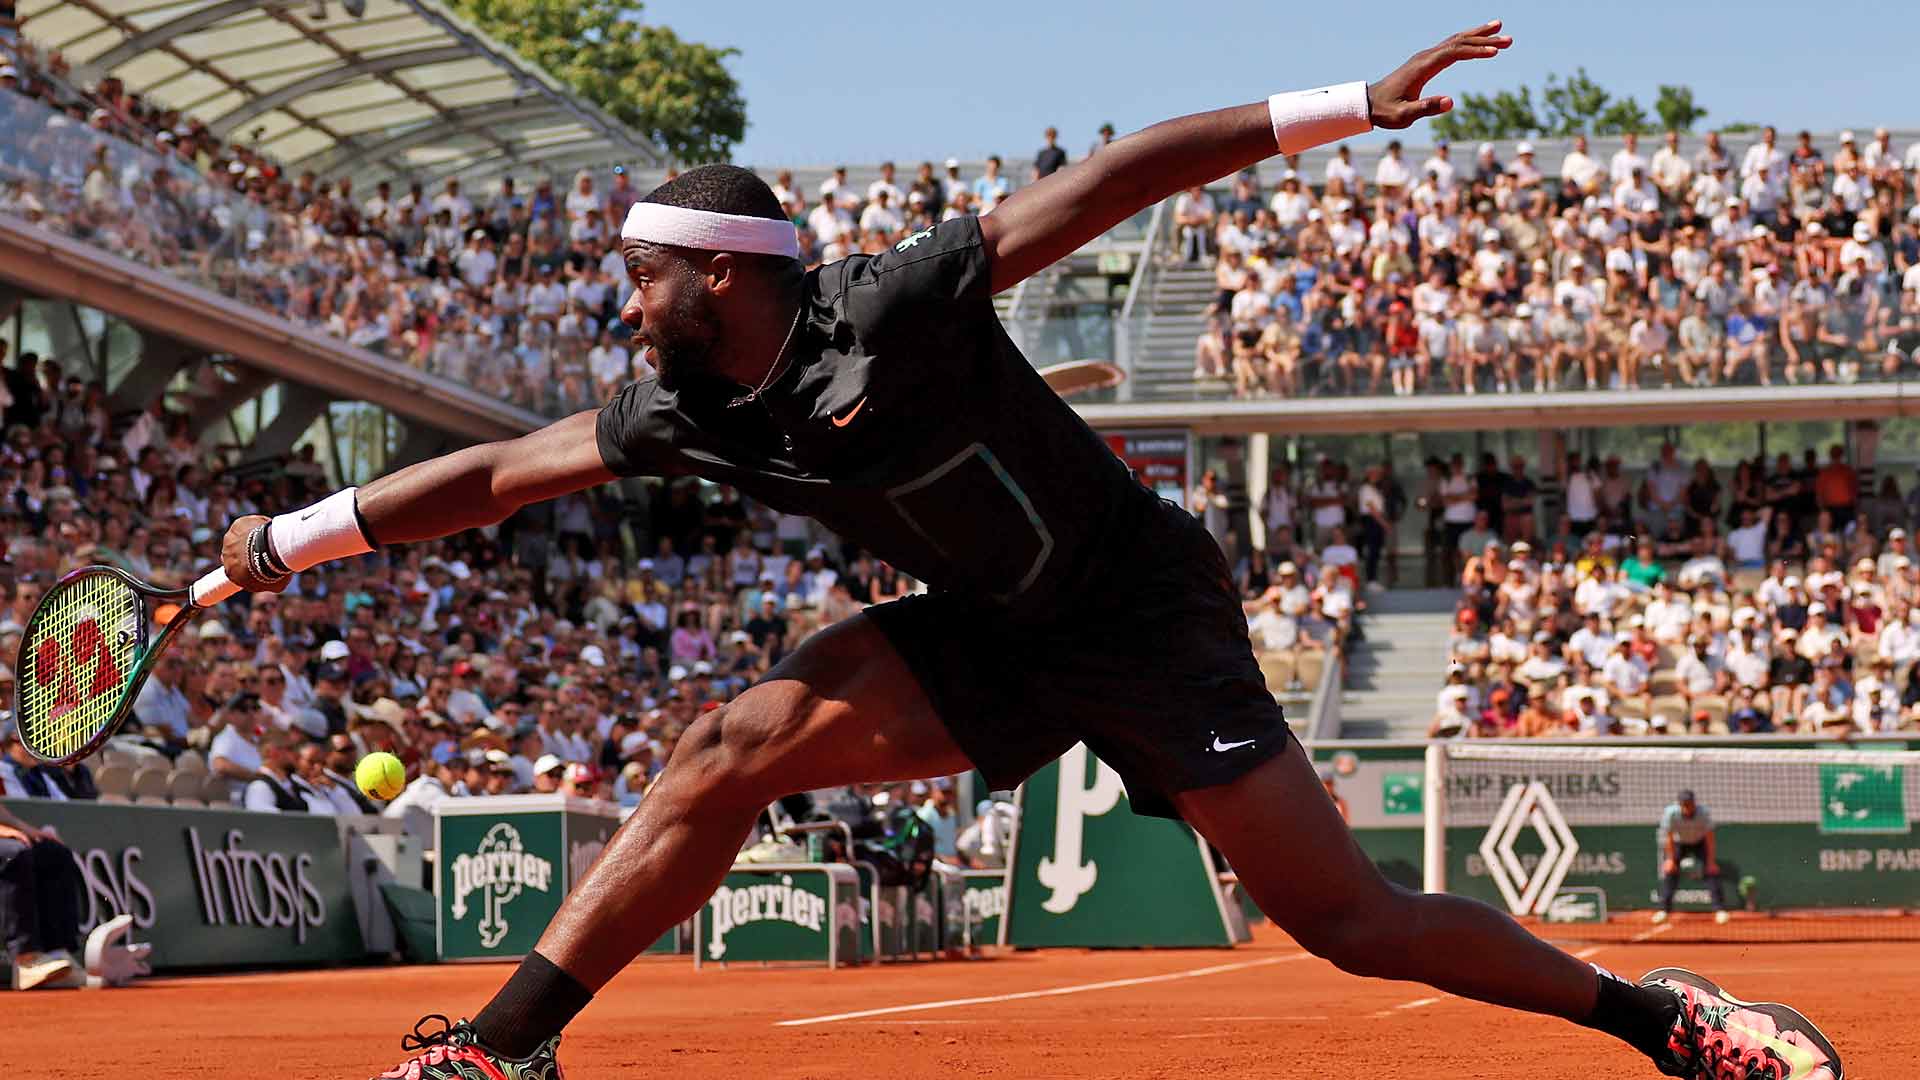 Frances Tiafoe is into the third round at Roland Garros for the first time in eight main draw appearances.